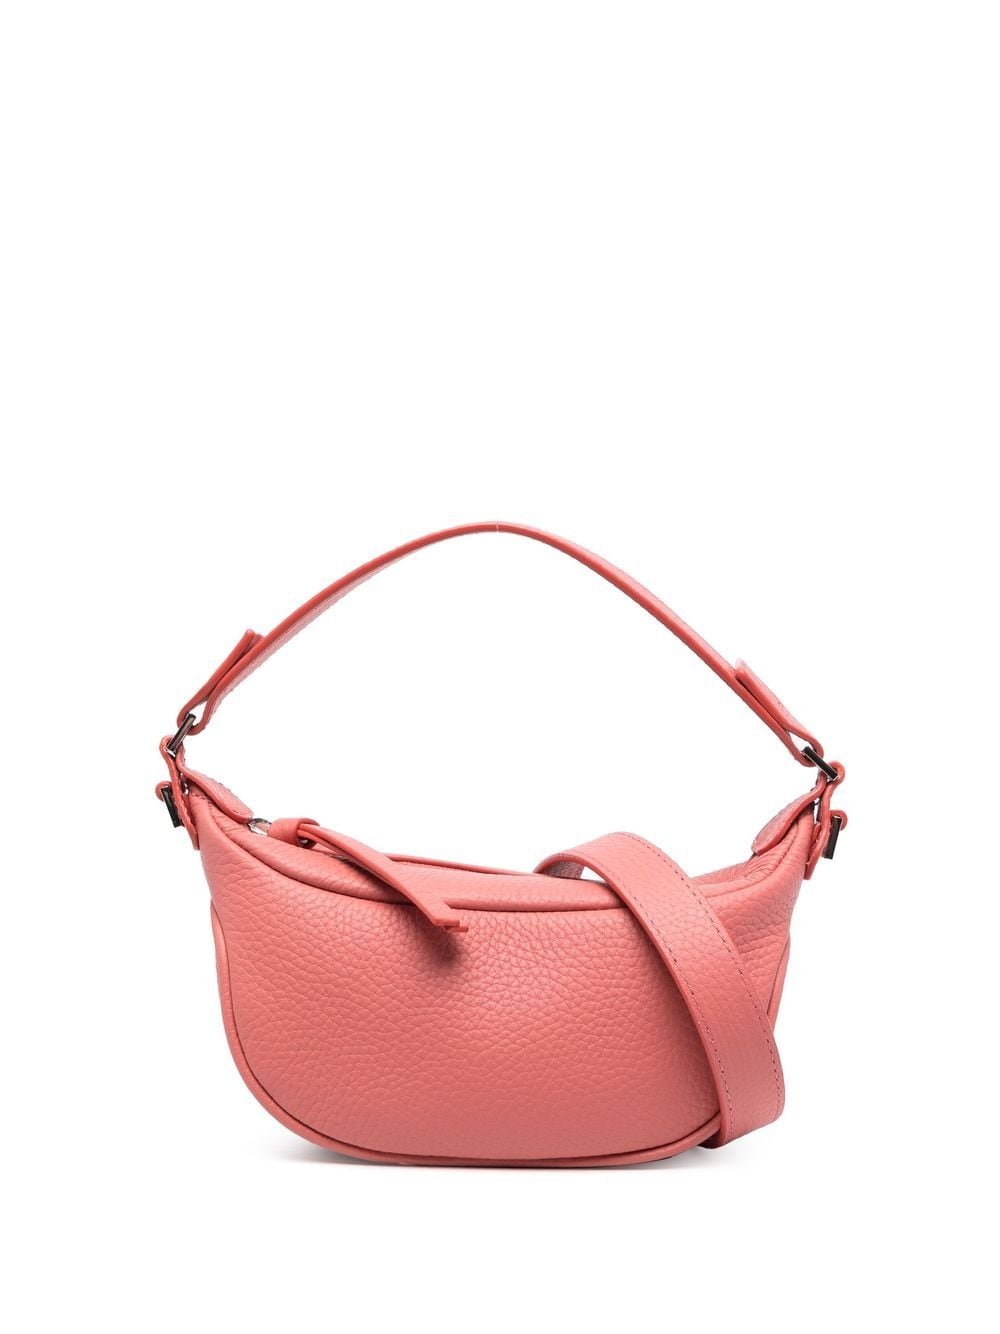 BY FAR pebbled-texture tote bag - Pink von BY FAR